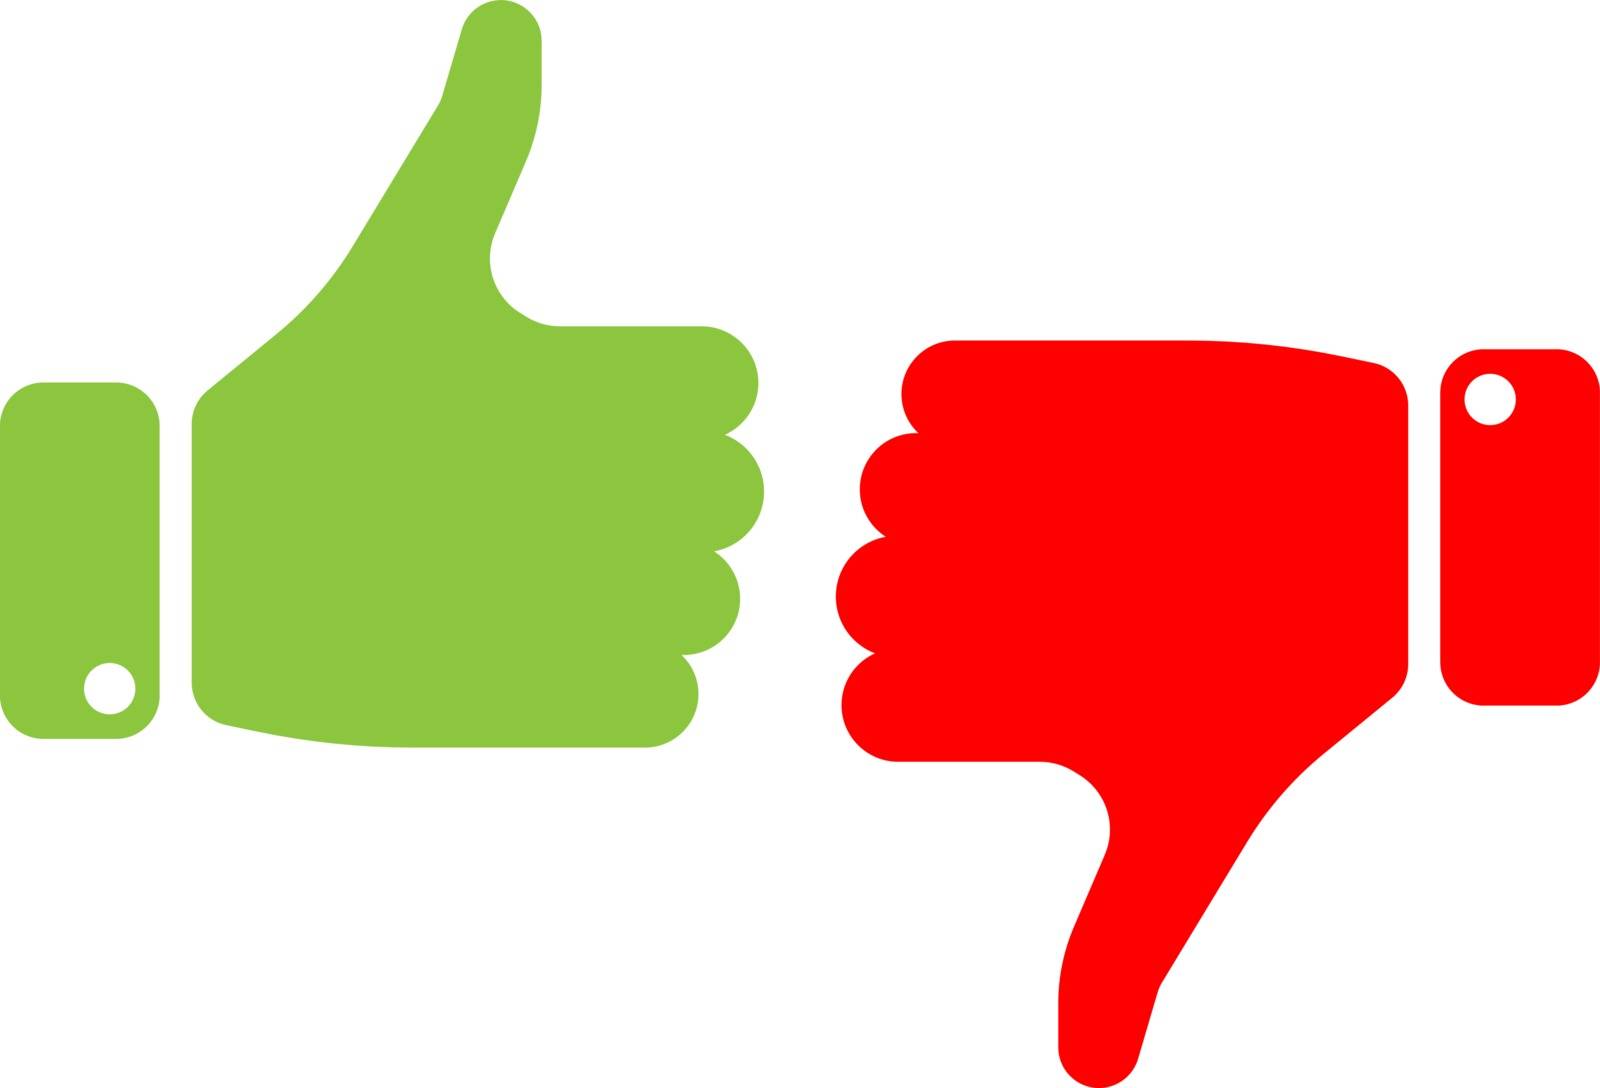 Vote thumbs up icon in red and green . Make a choice, yes or no, love it or hate it, like or dislike win or loss. Vector illustration.